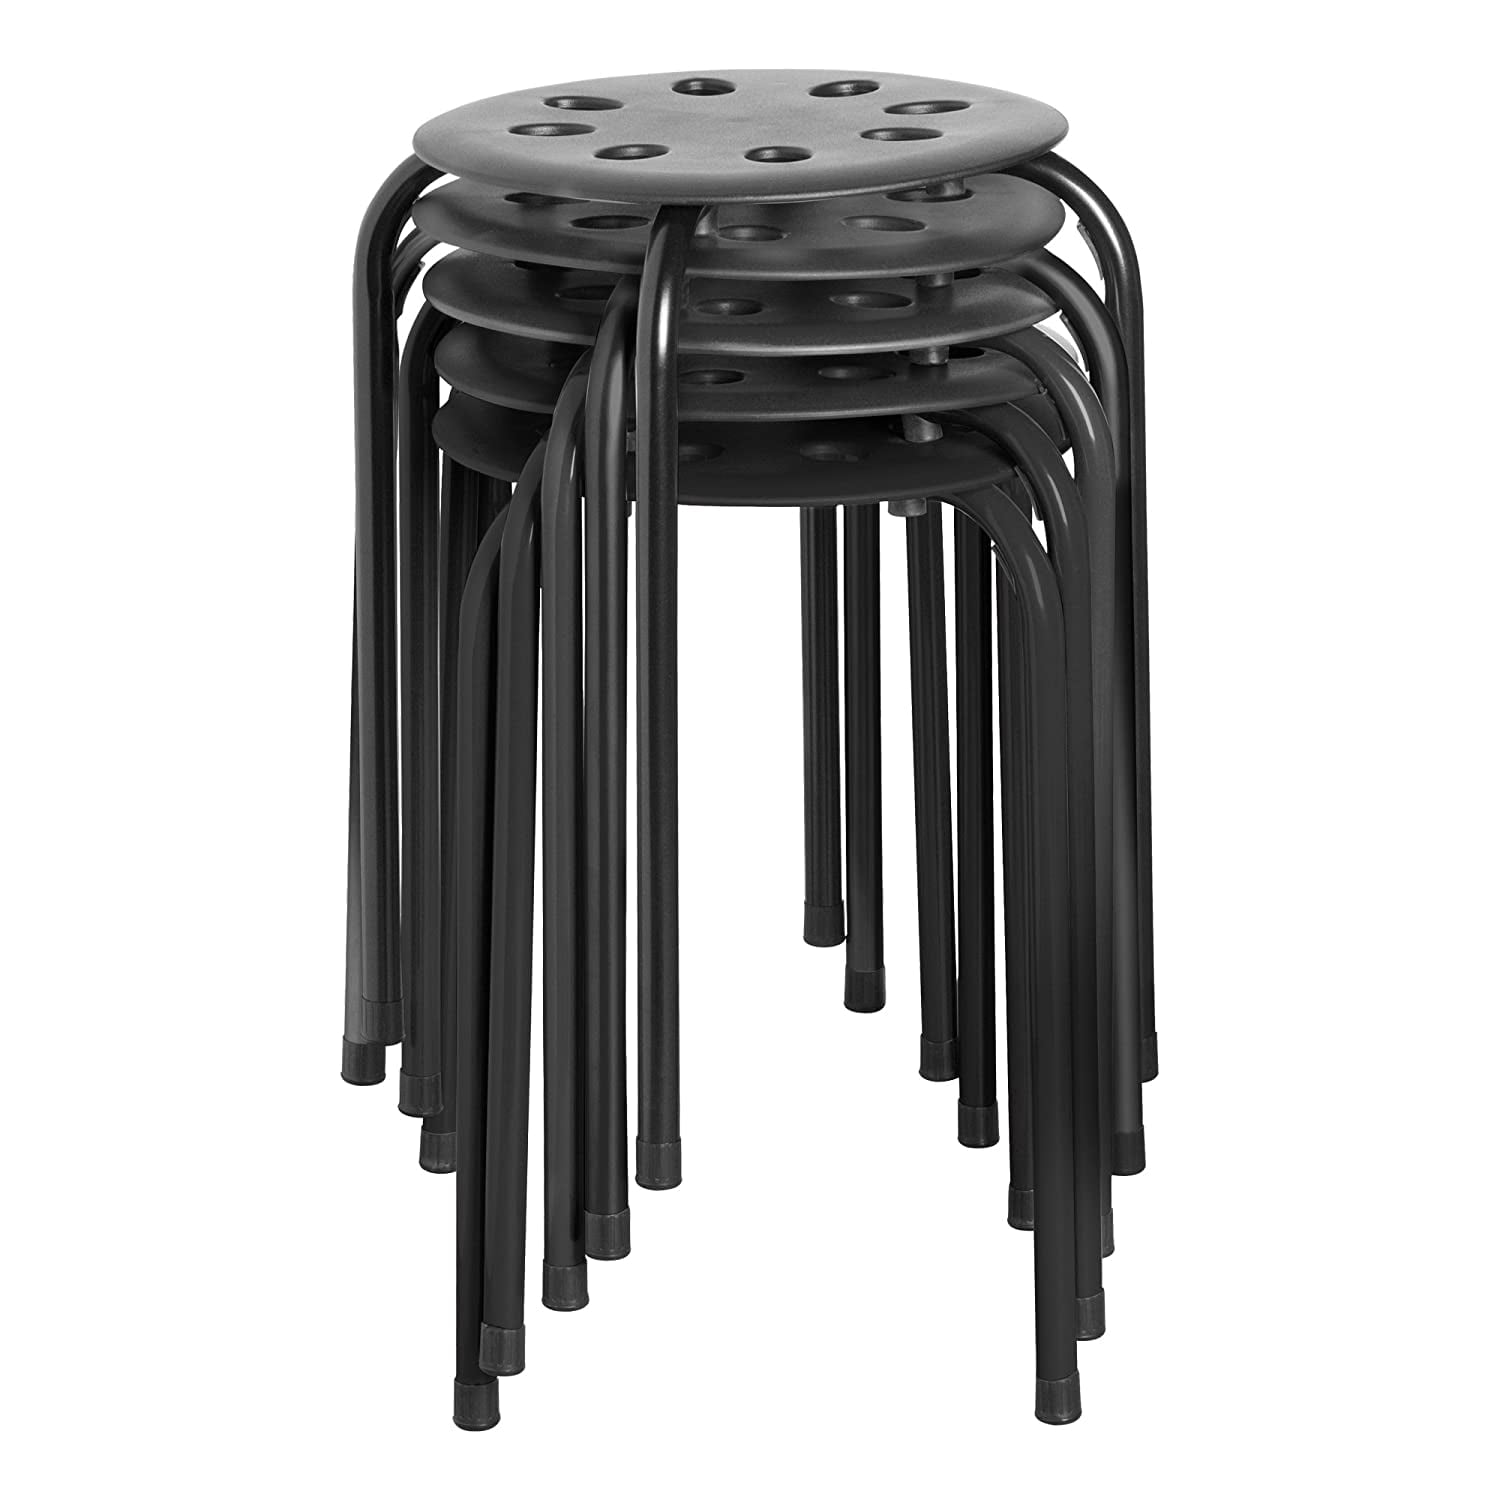 10 Pack Stackable Nesting Stools/Chairs for Kids and Adults Norwood Commercial Furniture Black & Silver Stacking Stool Set